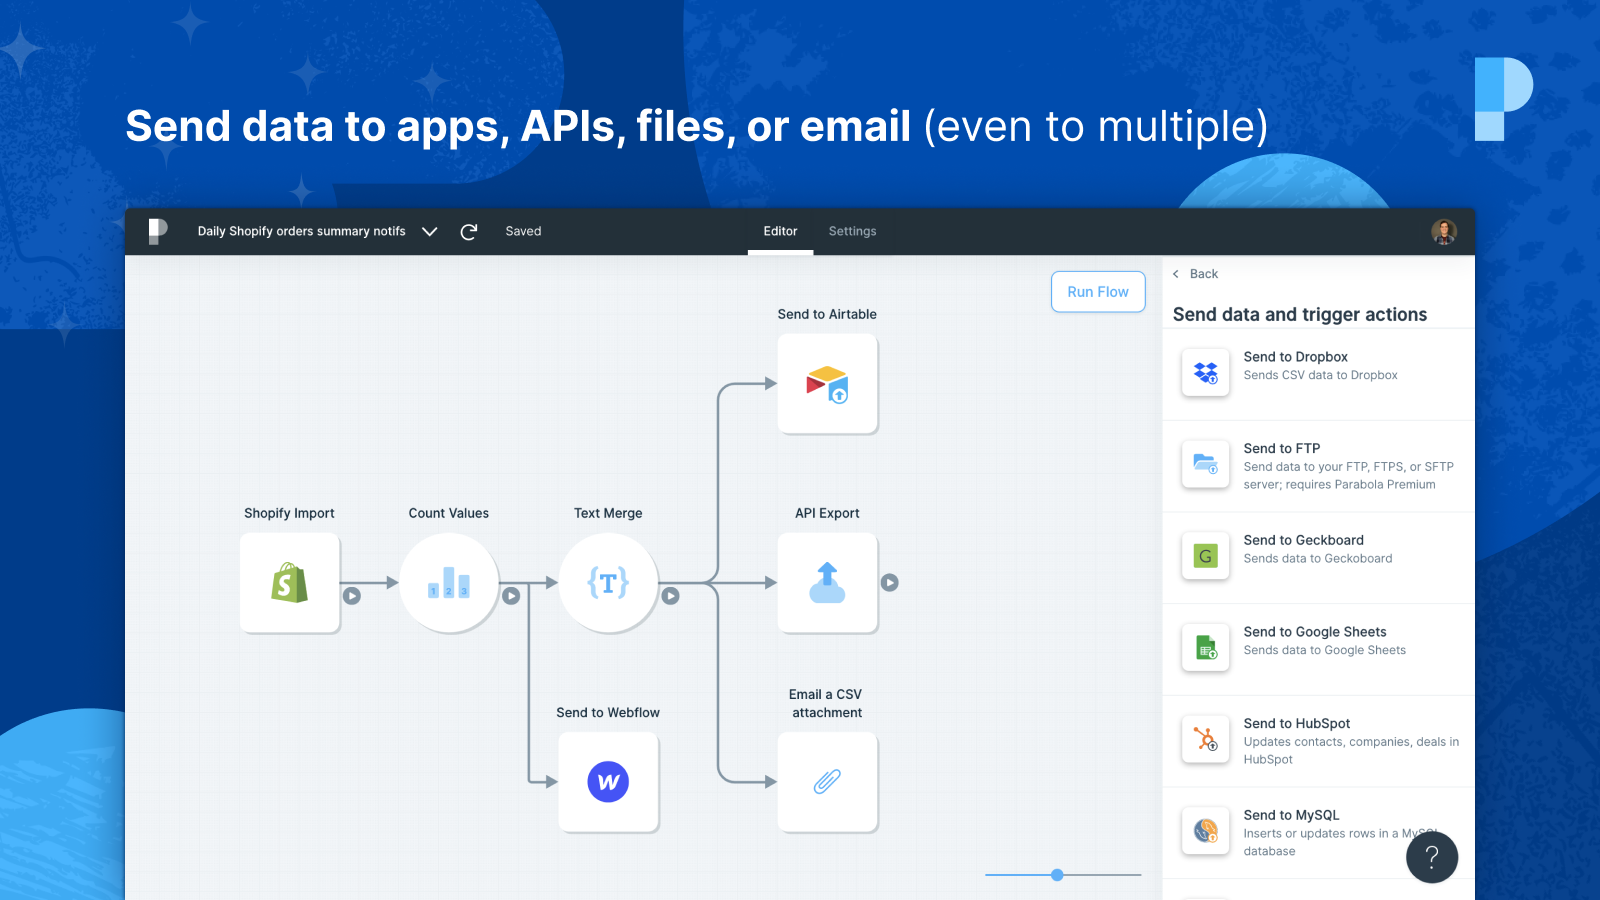 Send data to apps, APIs, files, or email (even to multiple)